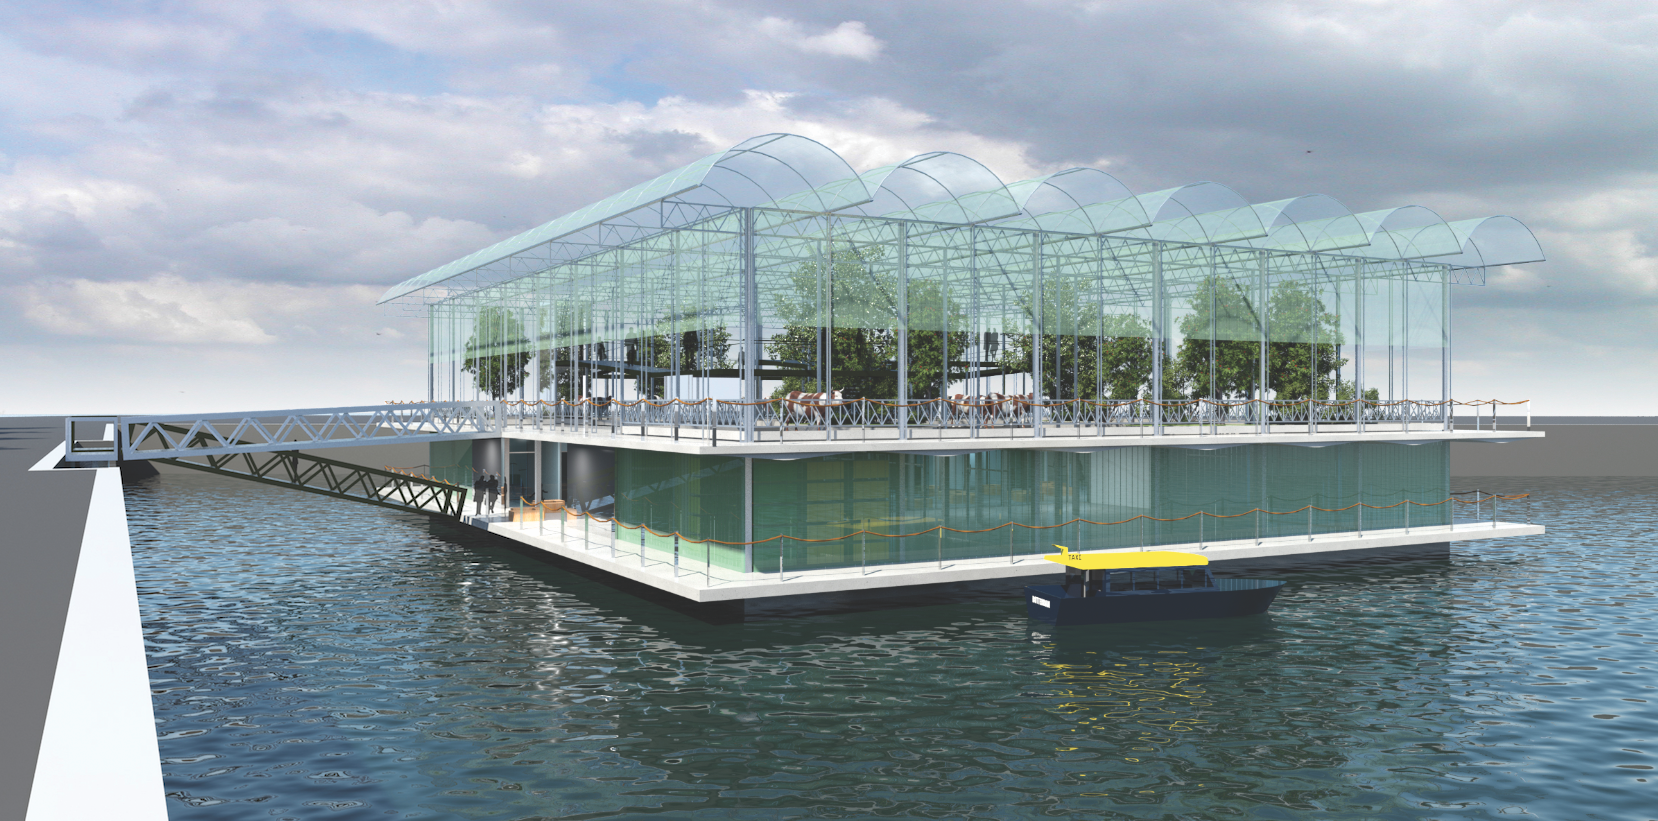 Merwehaven Harbor in Rotterdam will be home to the world’s first floating farm.